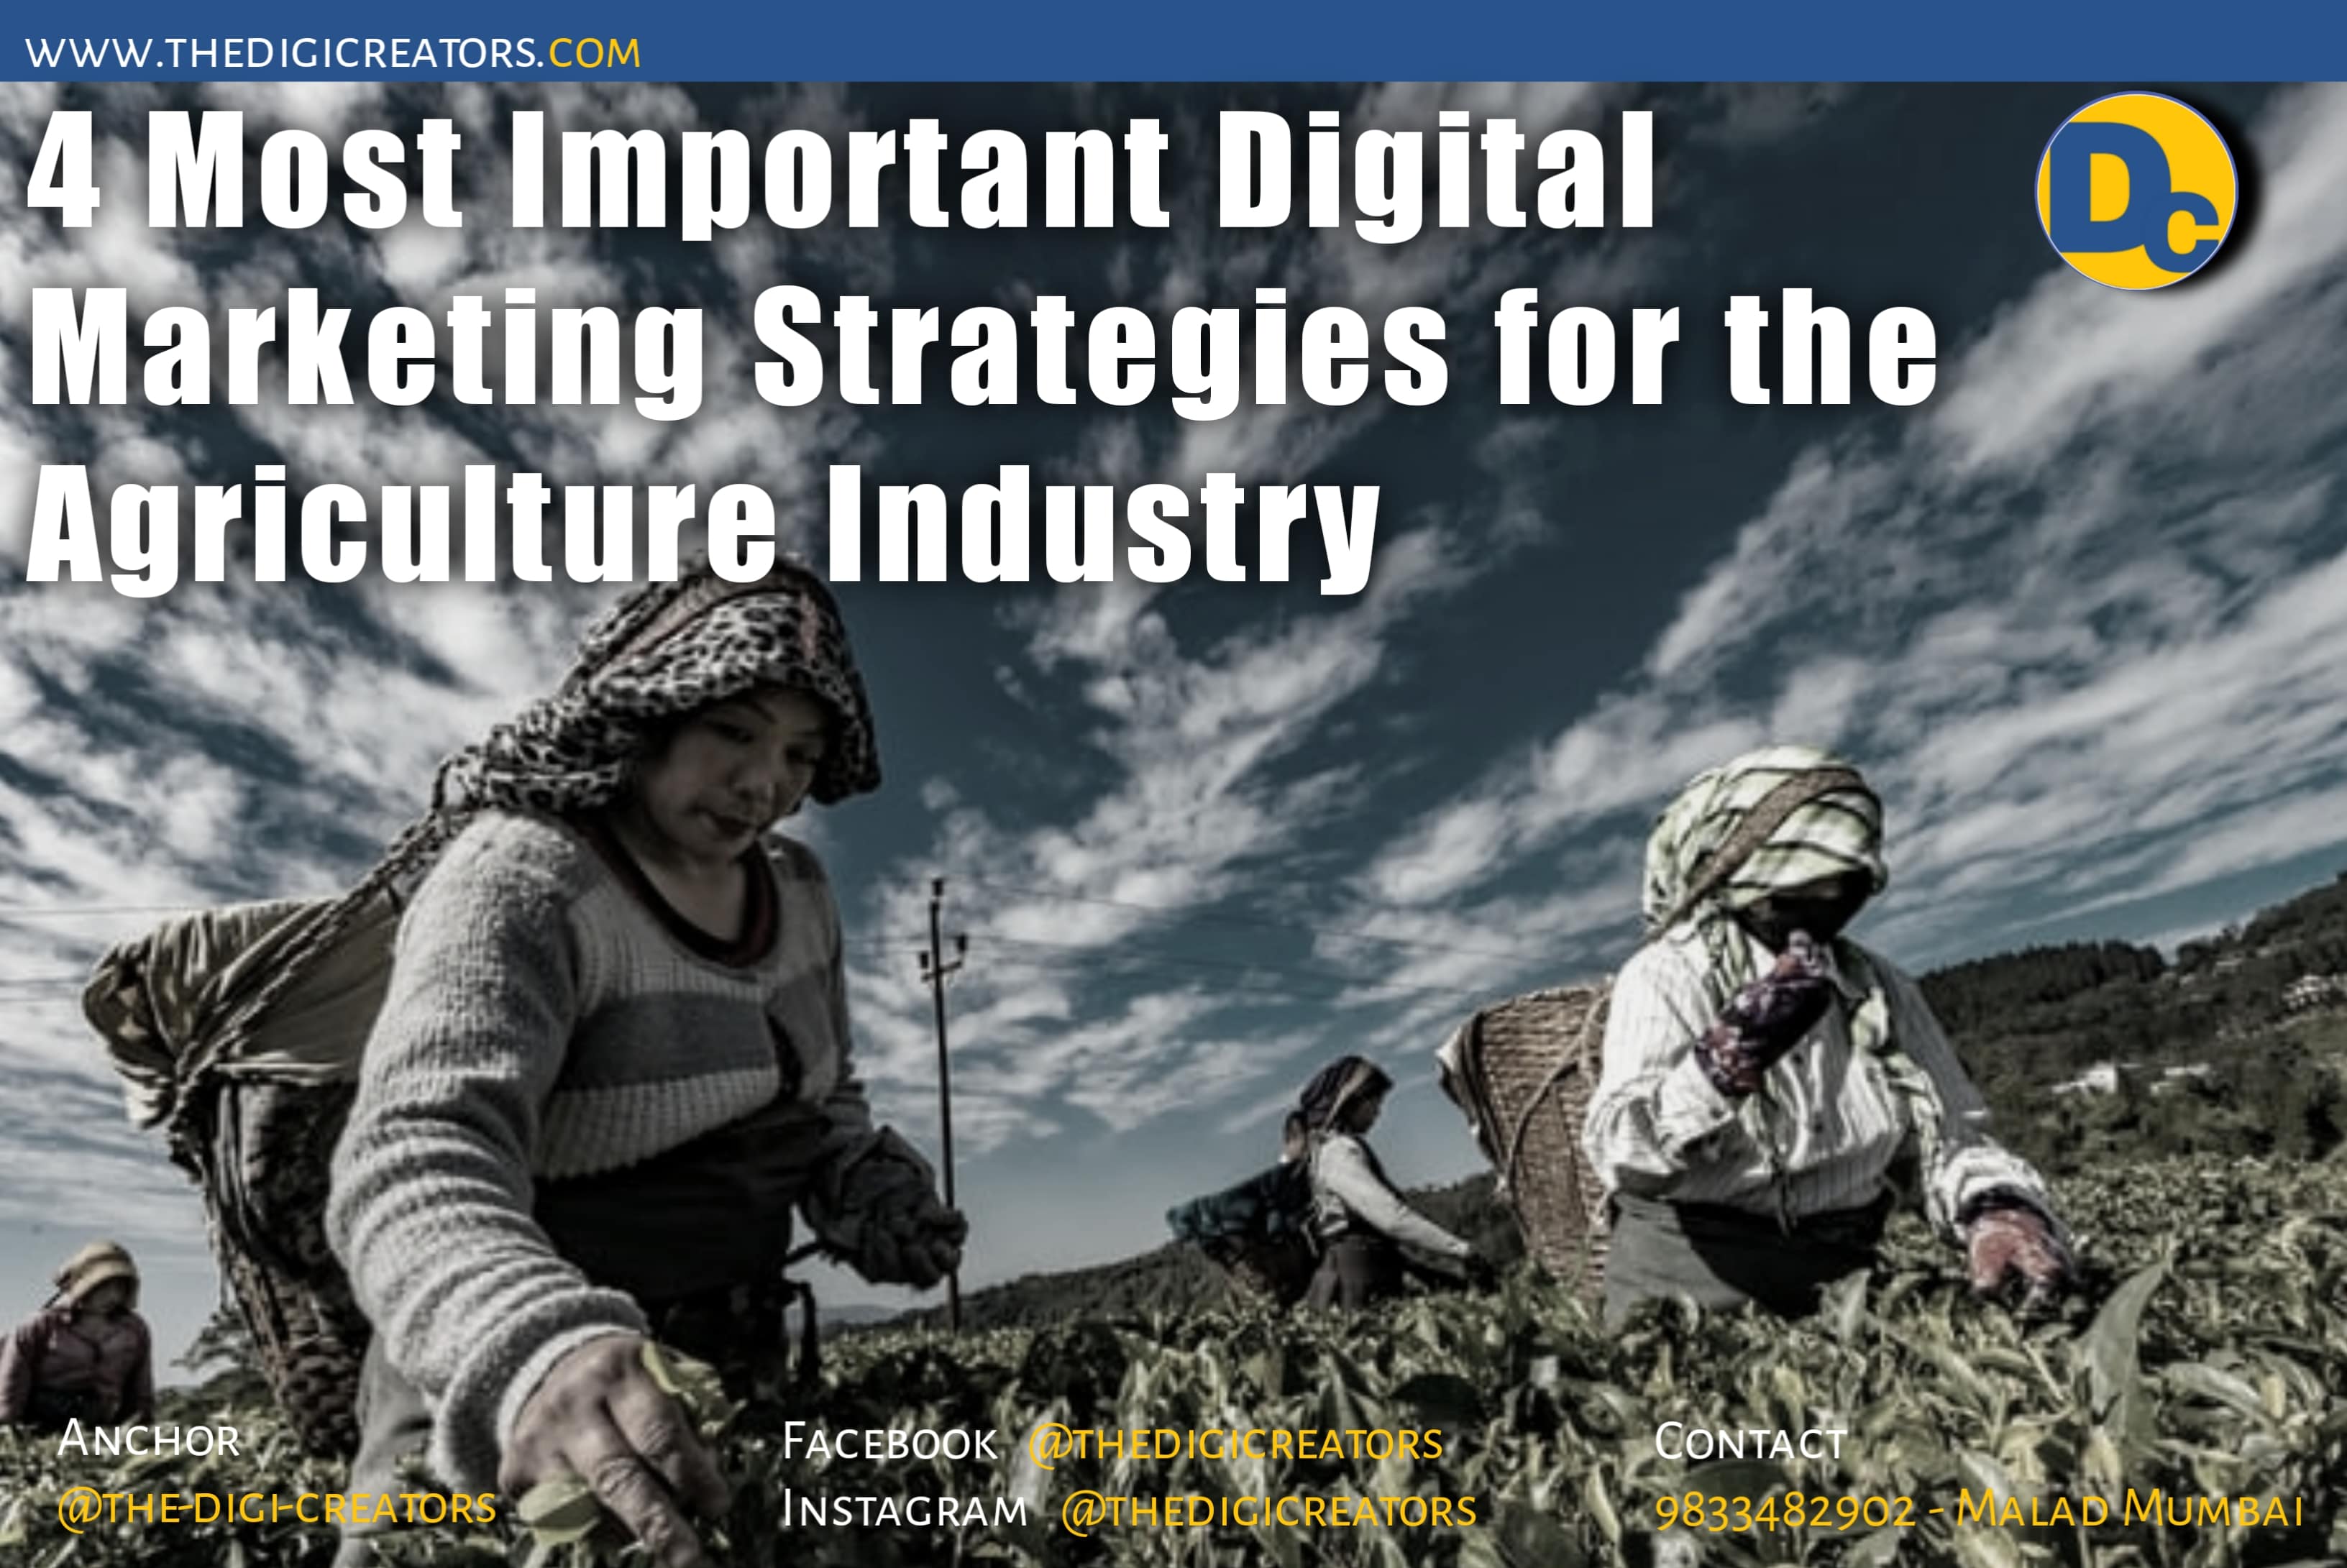 Top Digital Marketing Strategies For Agriculture Industry